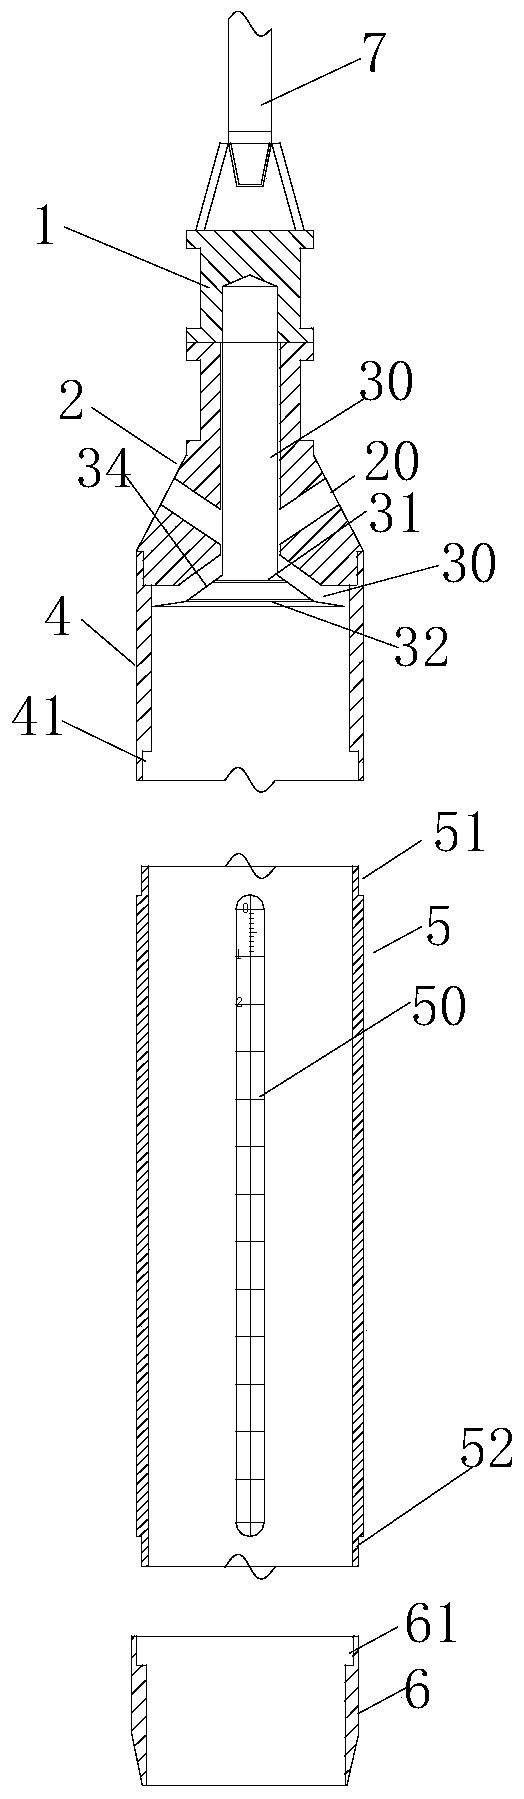 Sludge and sludge soil sample collecting and sampling device